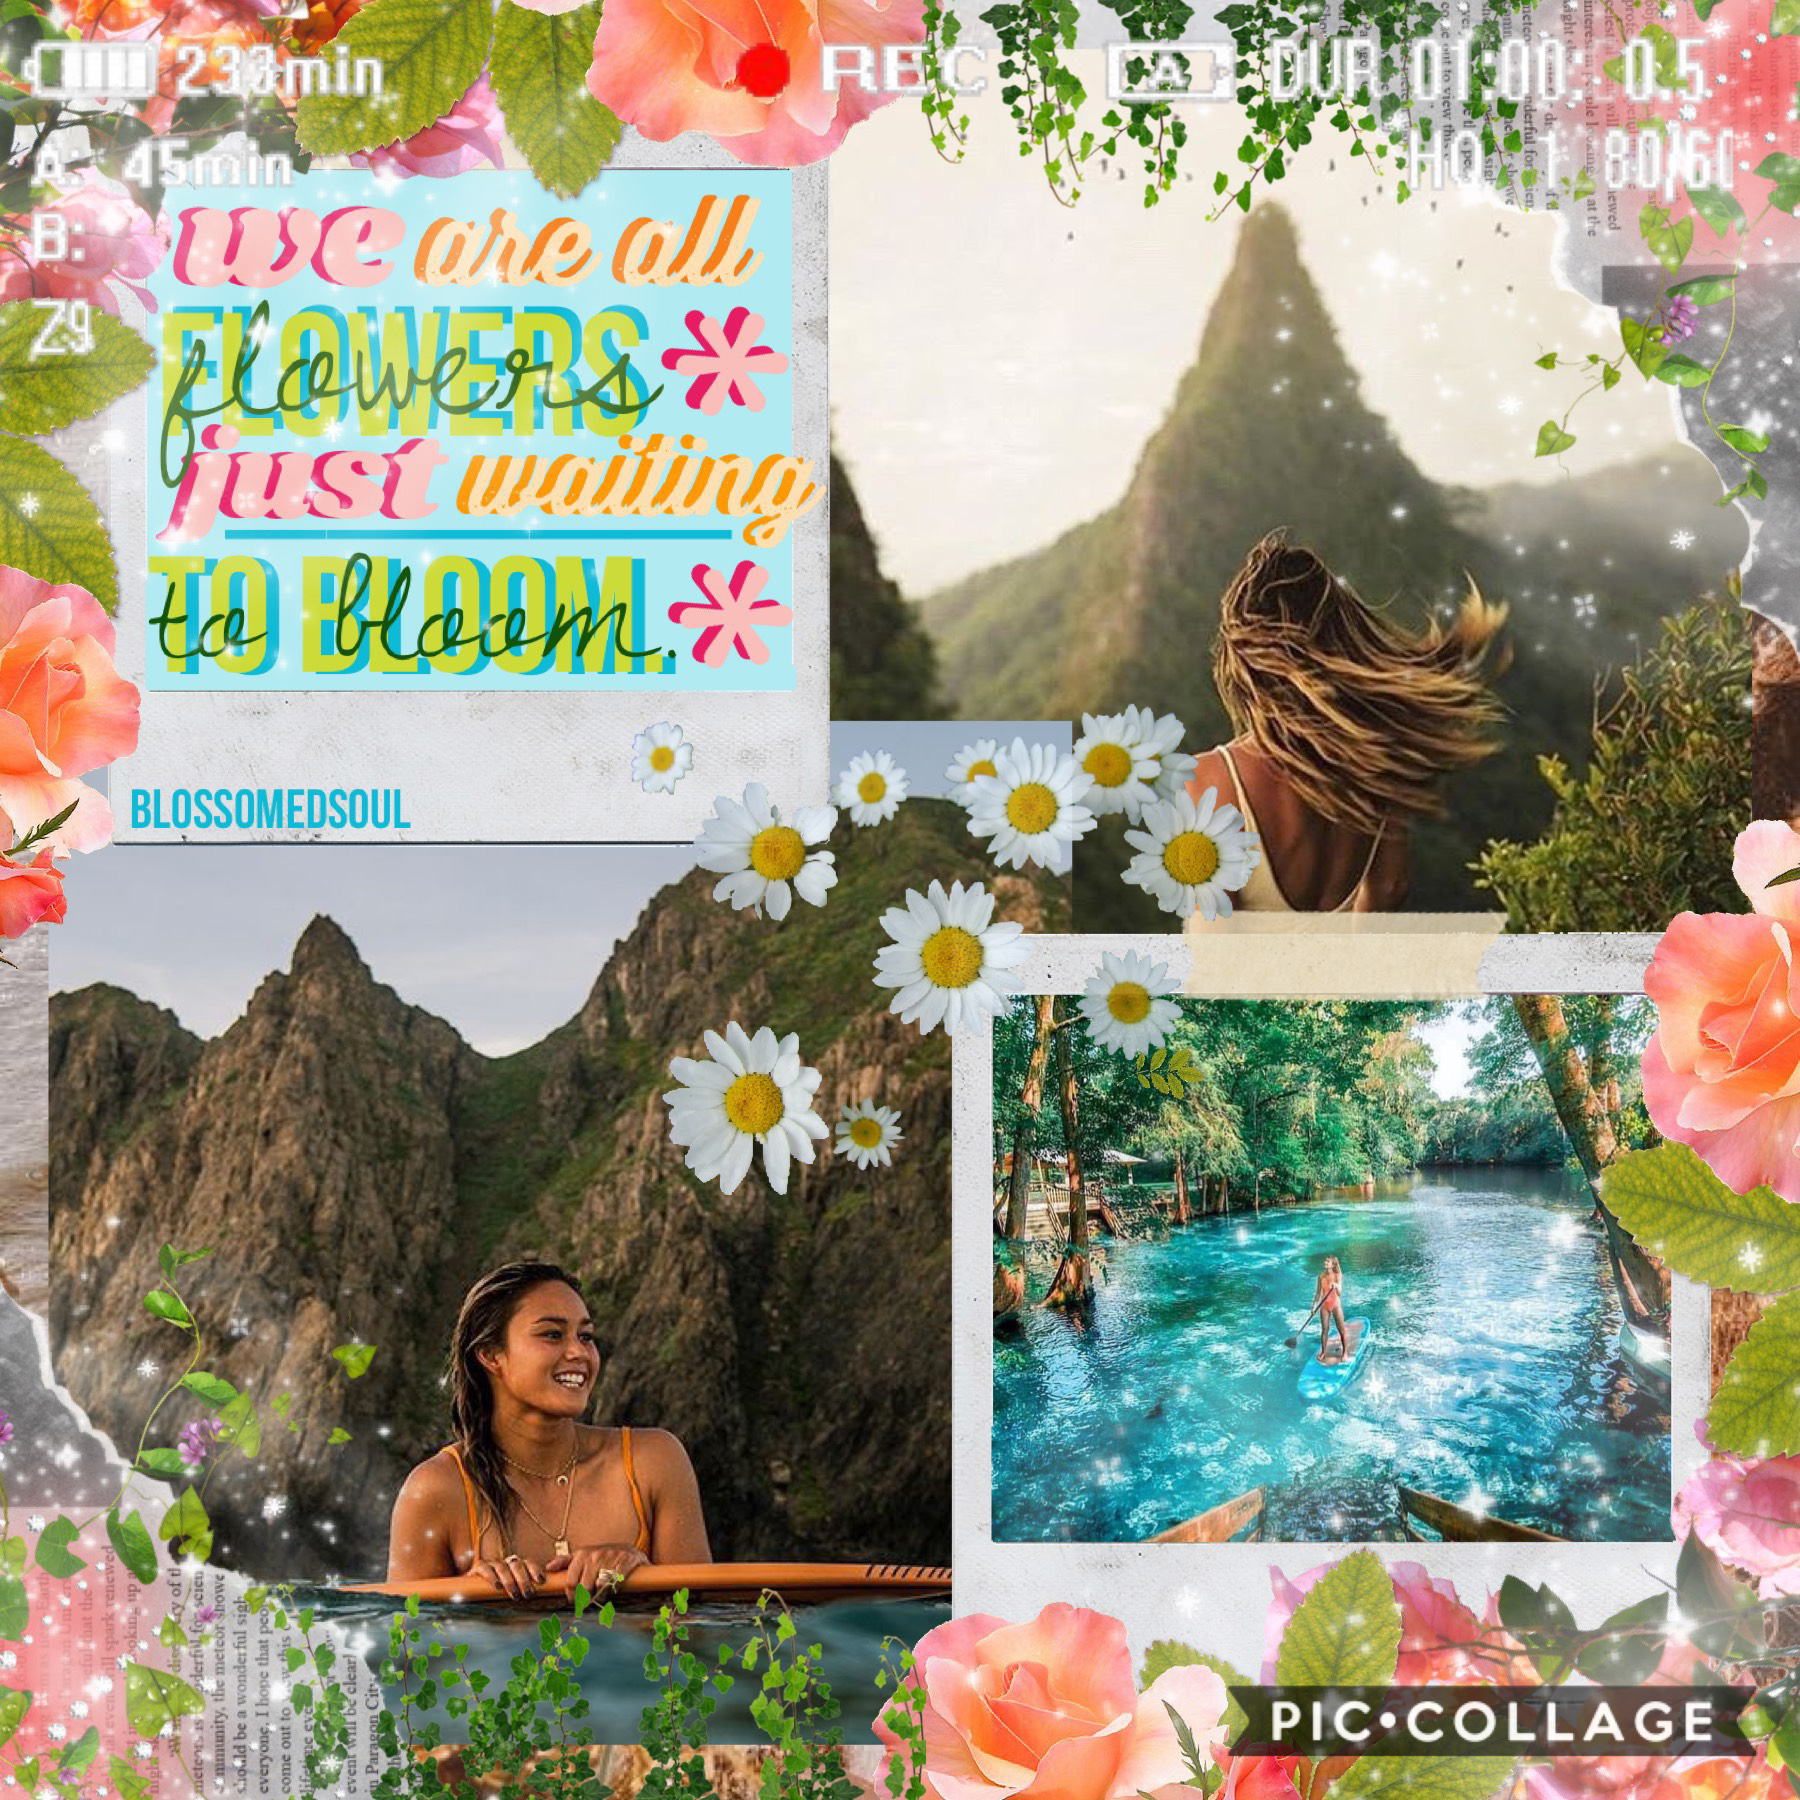 [ t a p ] 

oof this collage is kinda dark for my taste, what do you think? 💘🌿 soo excited that it’s the weekend and spring break is next week! 🤩✨  qotd: when’s your spring break? ❤️ 